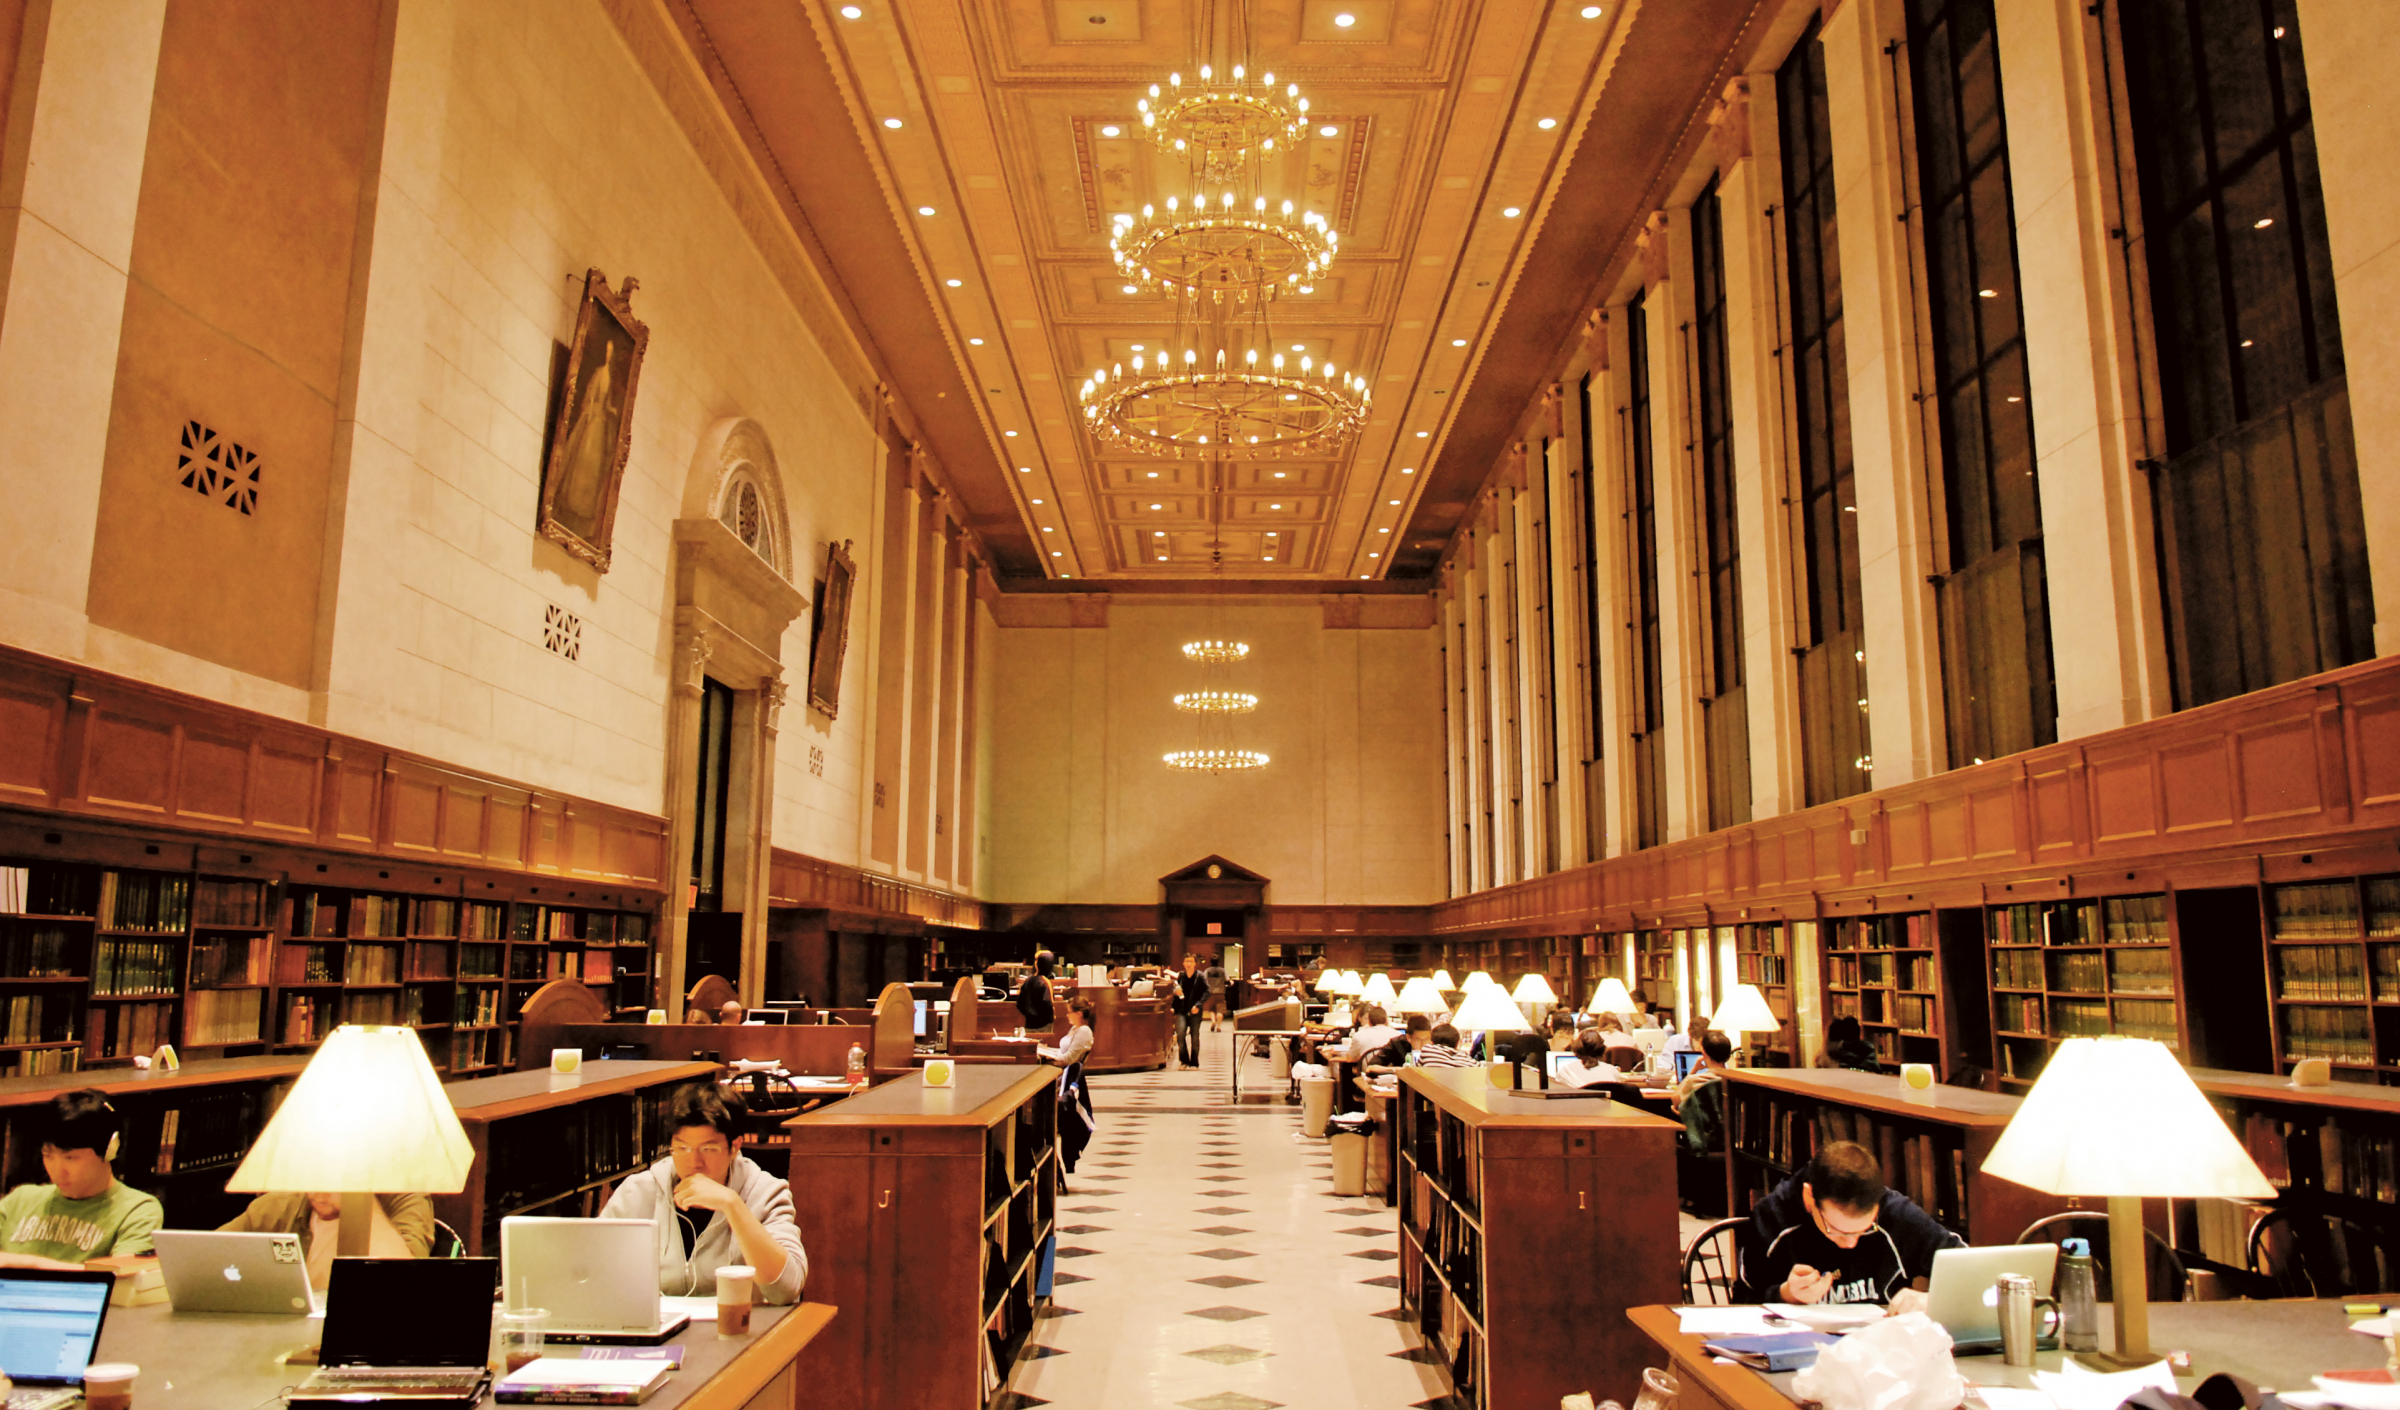 Students study in the library. Chandeliers are pictured above. 